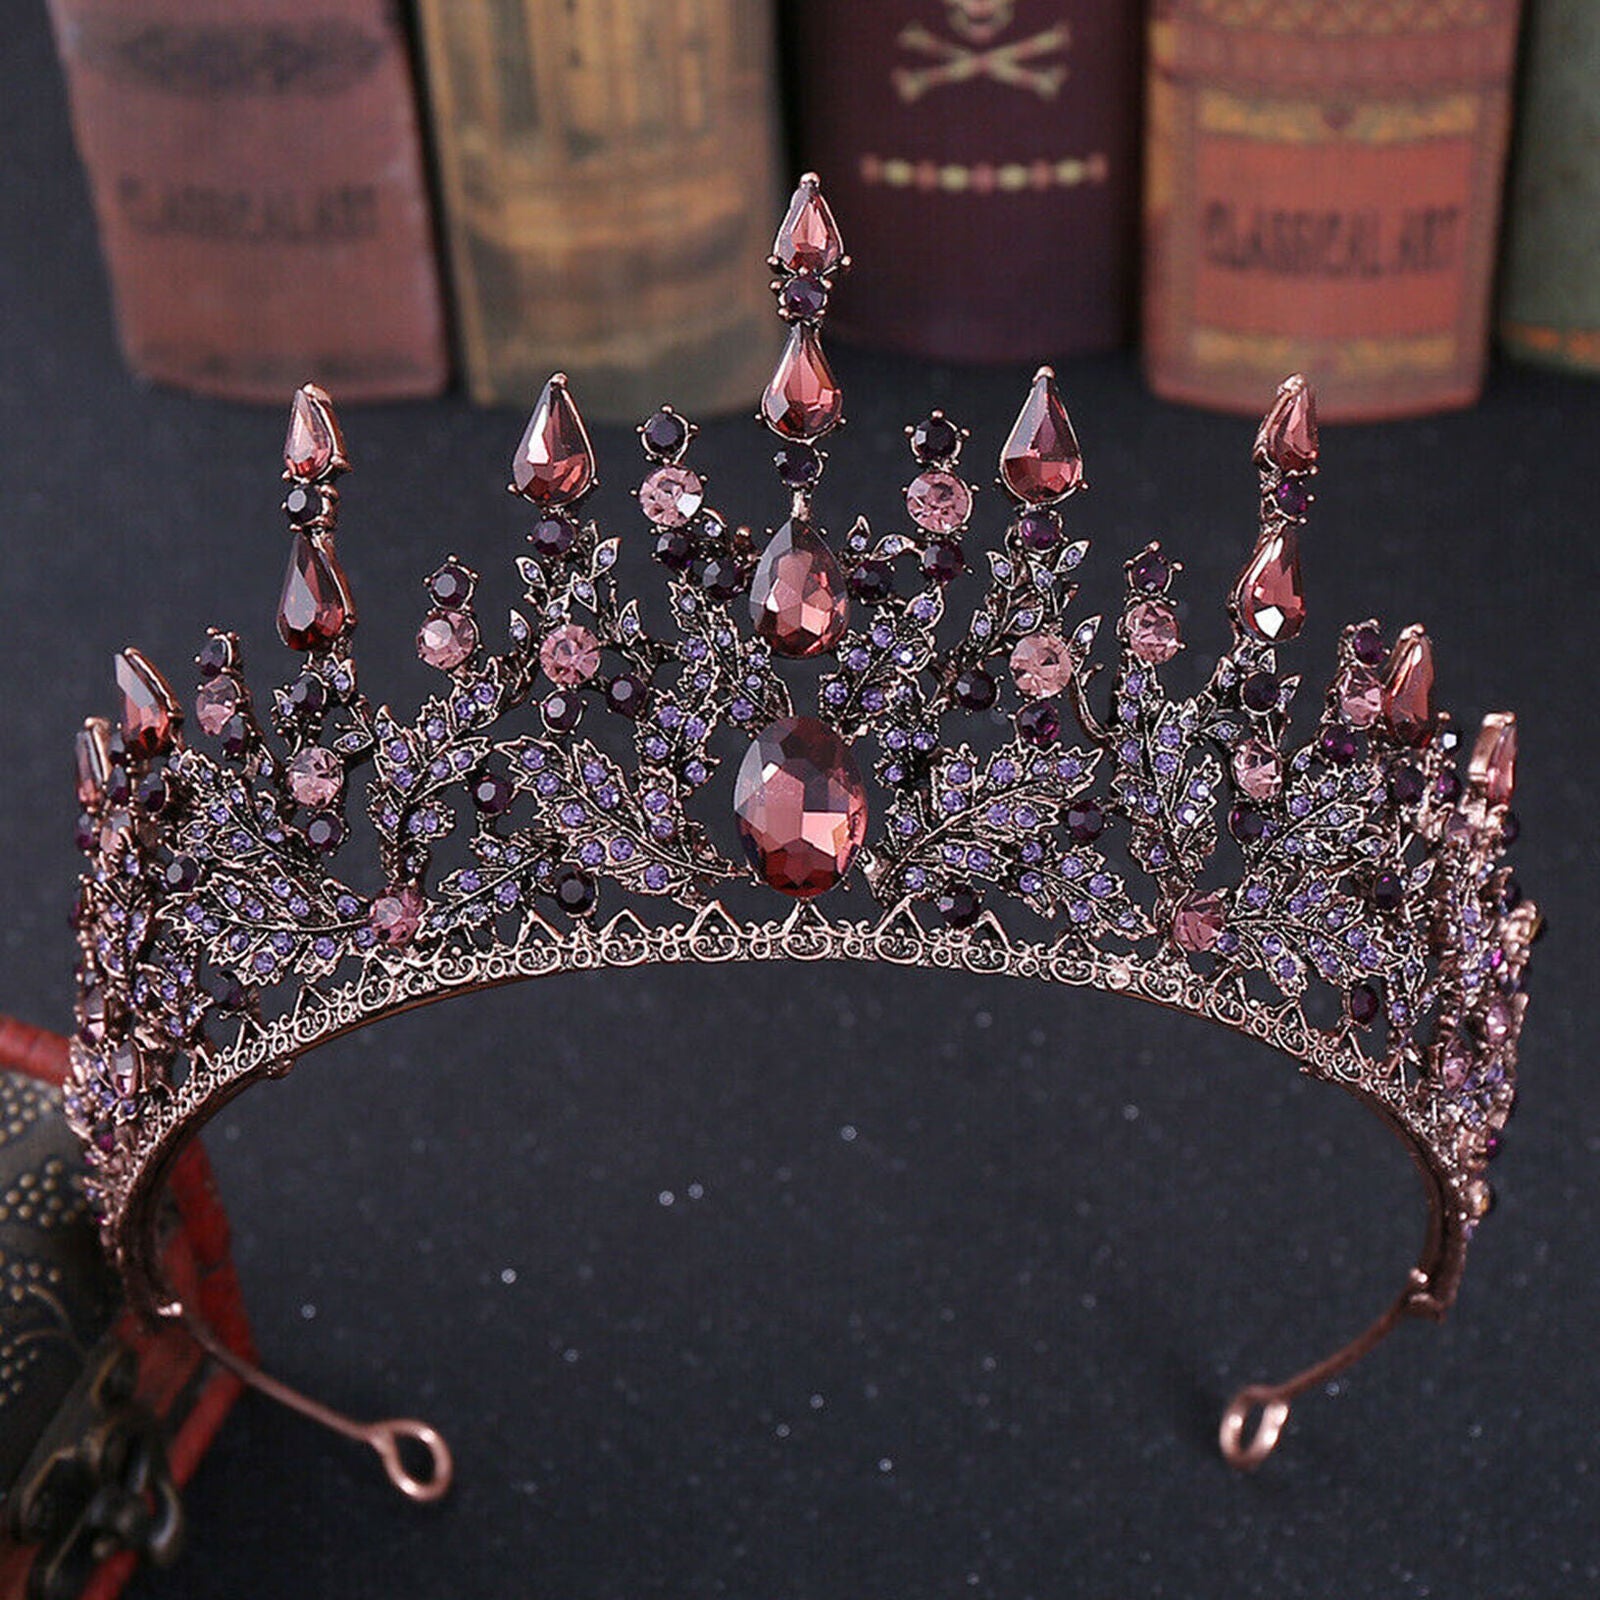 8.2cm High Luxury Crystal Wedding Bridal Party Pageant Prom Tiara Crown 6 Colors